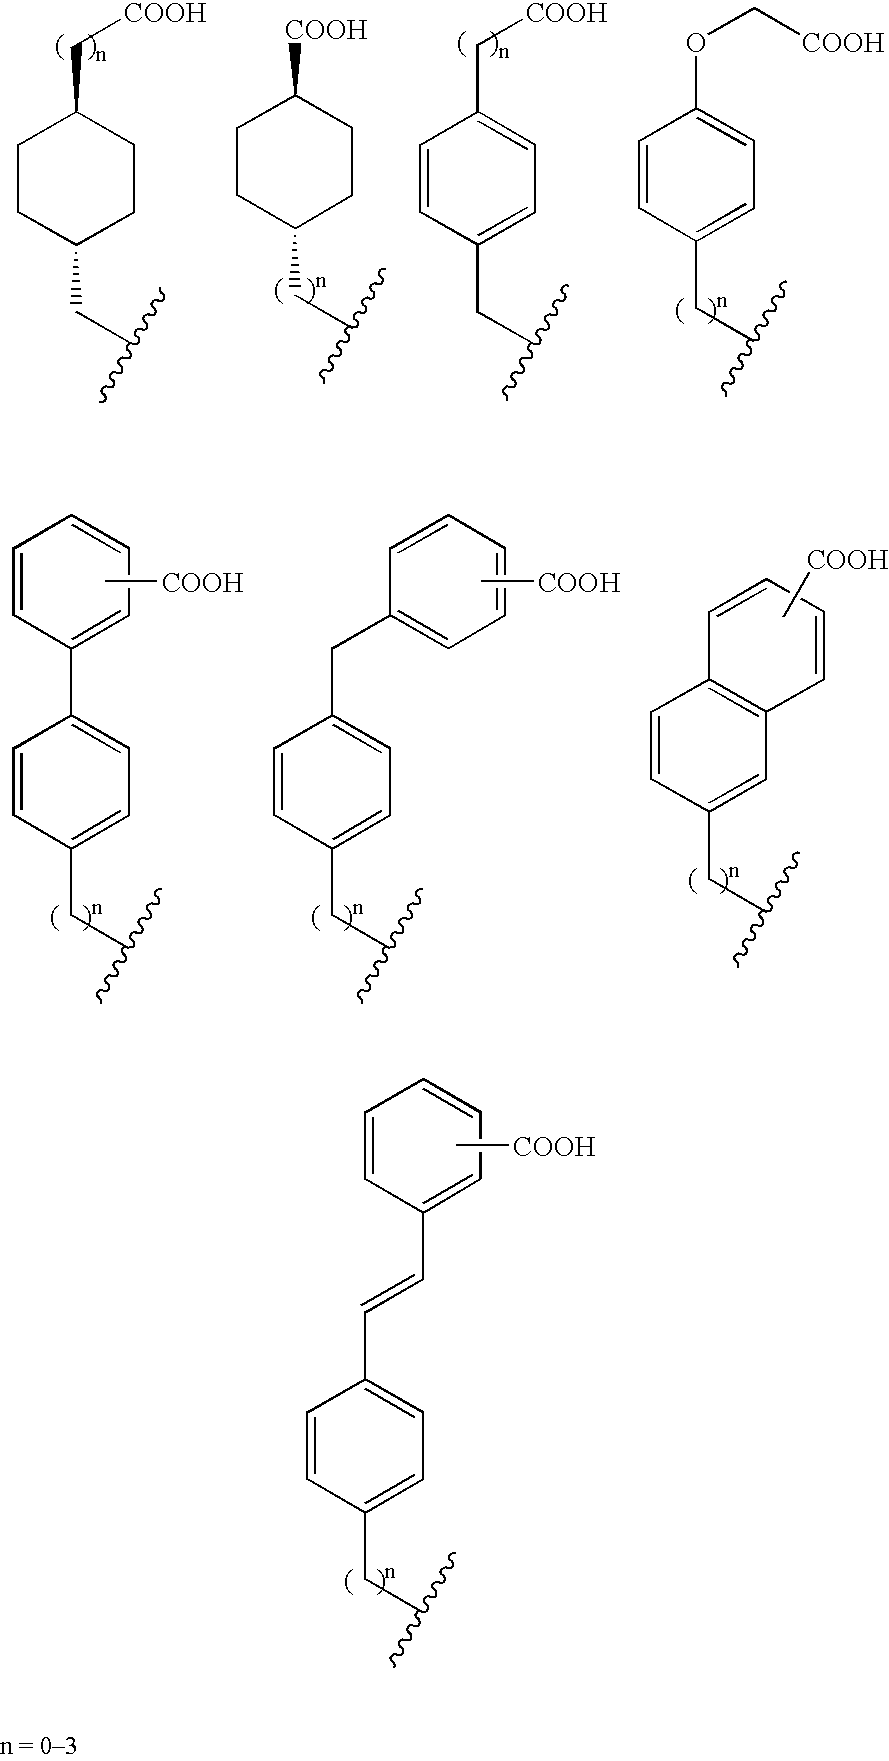 NR1H4 nuclear receptor binding compounds